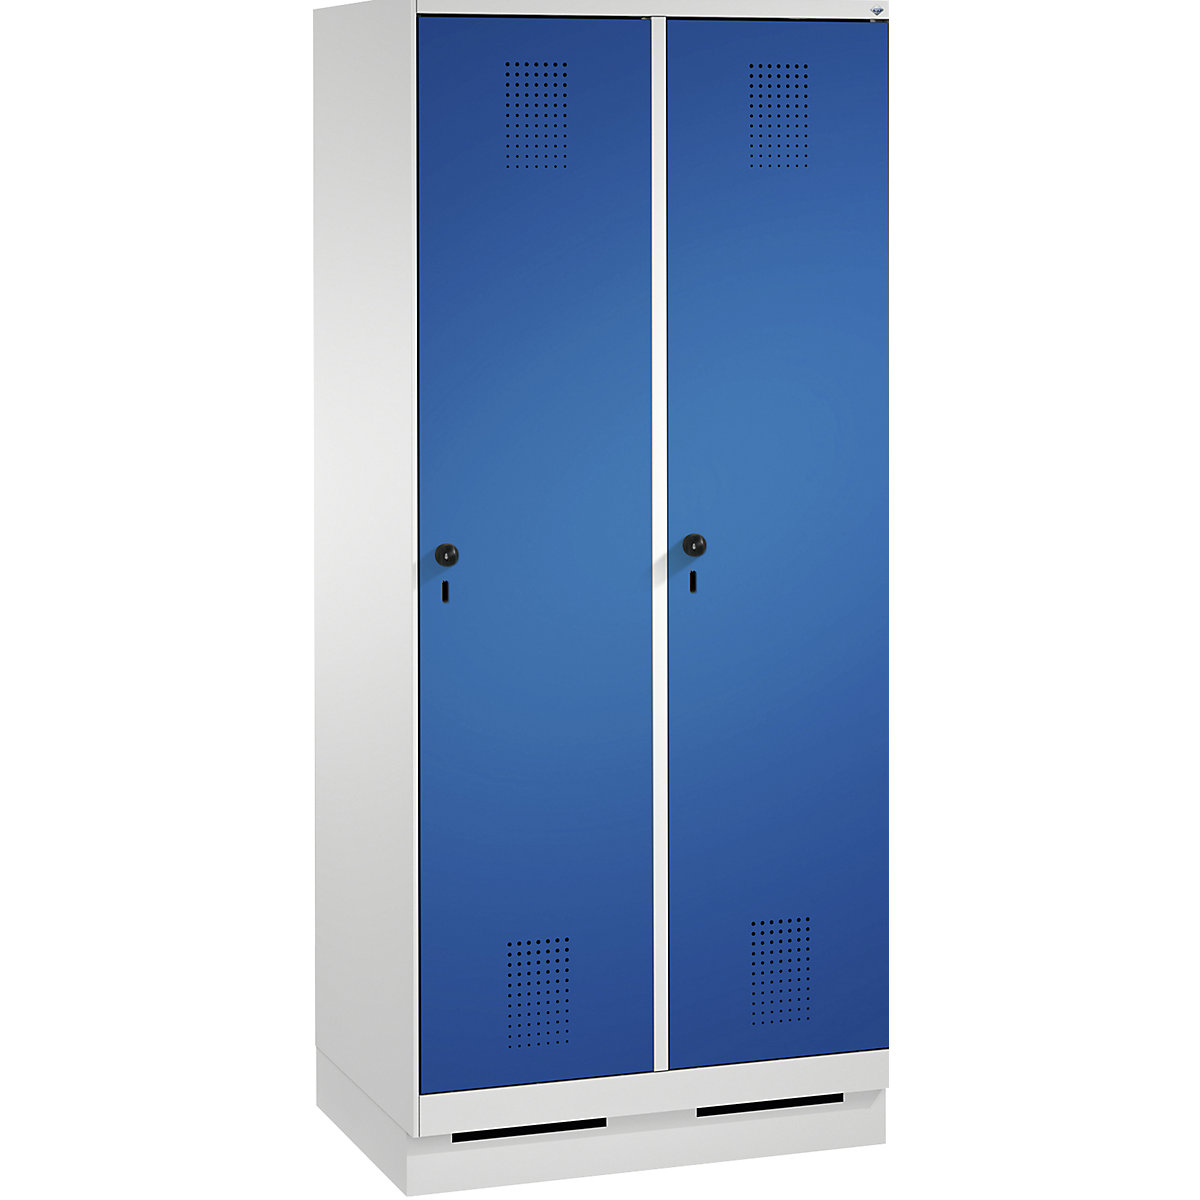 EVOLO storage cupboard, with plinth – C+P, 2 compartments, compartment width 400 mm, with 8 shelves, light grey / gentian blue-10